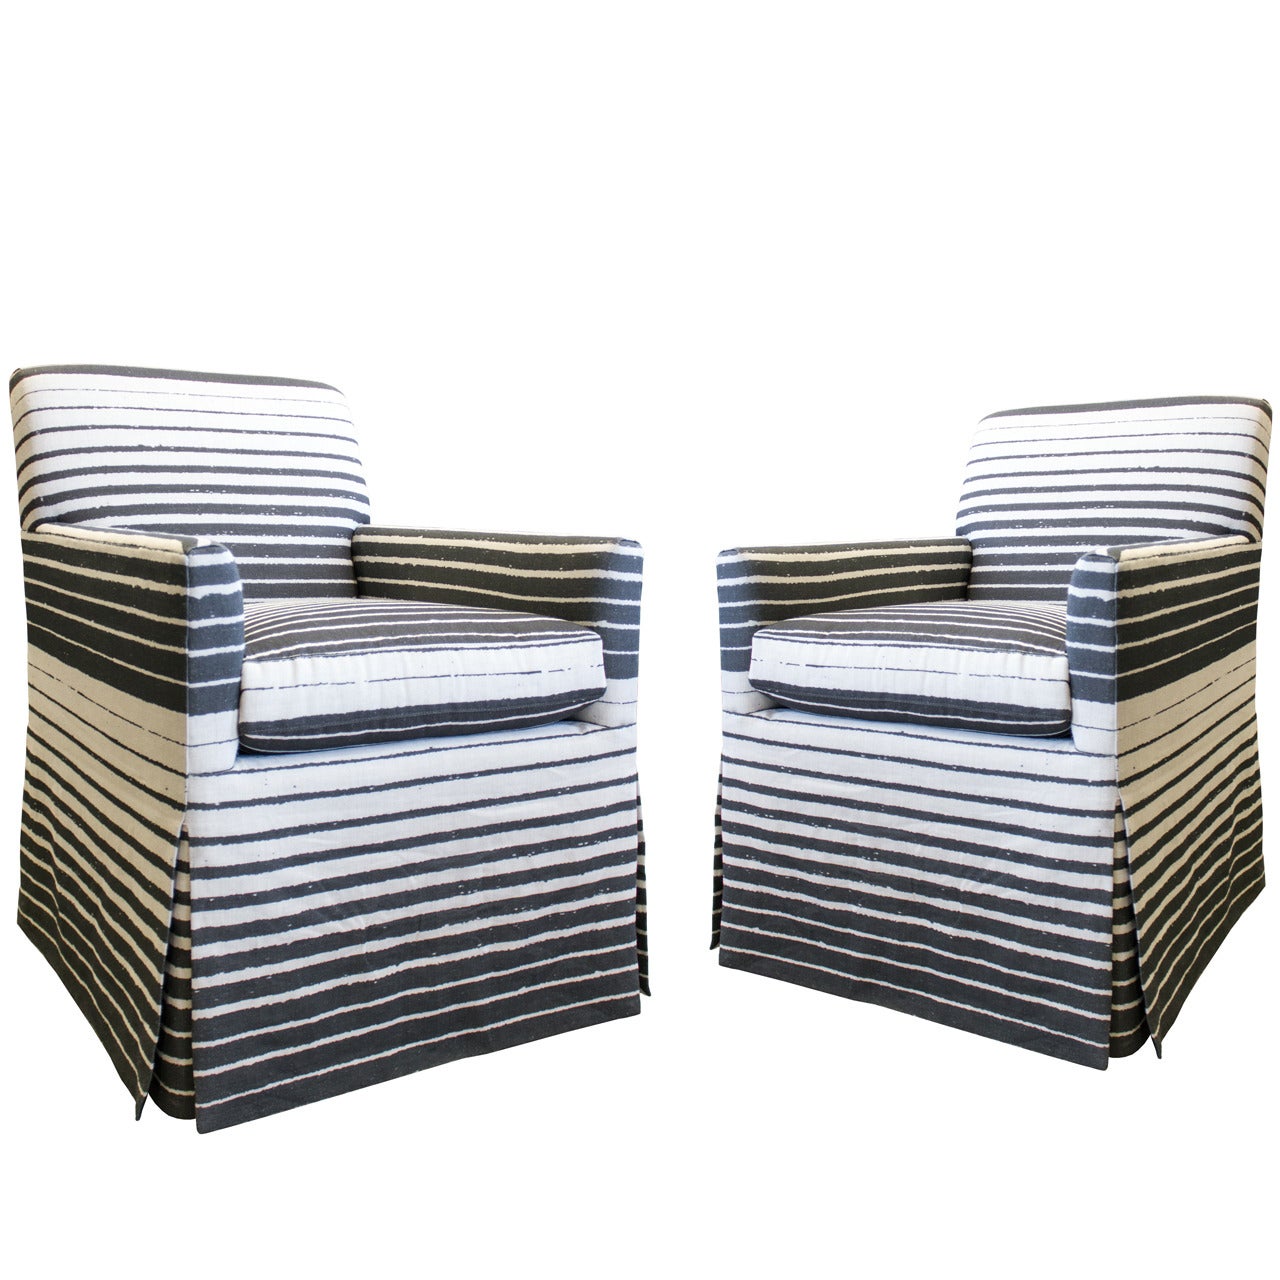 Pair of Upholstered Club Chairs from the Robert Brown Collection